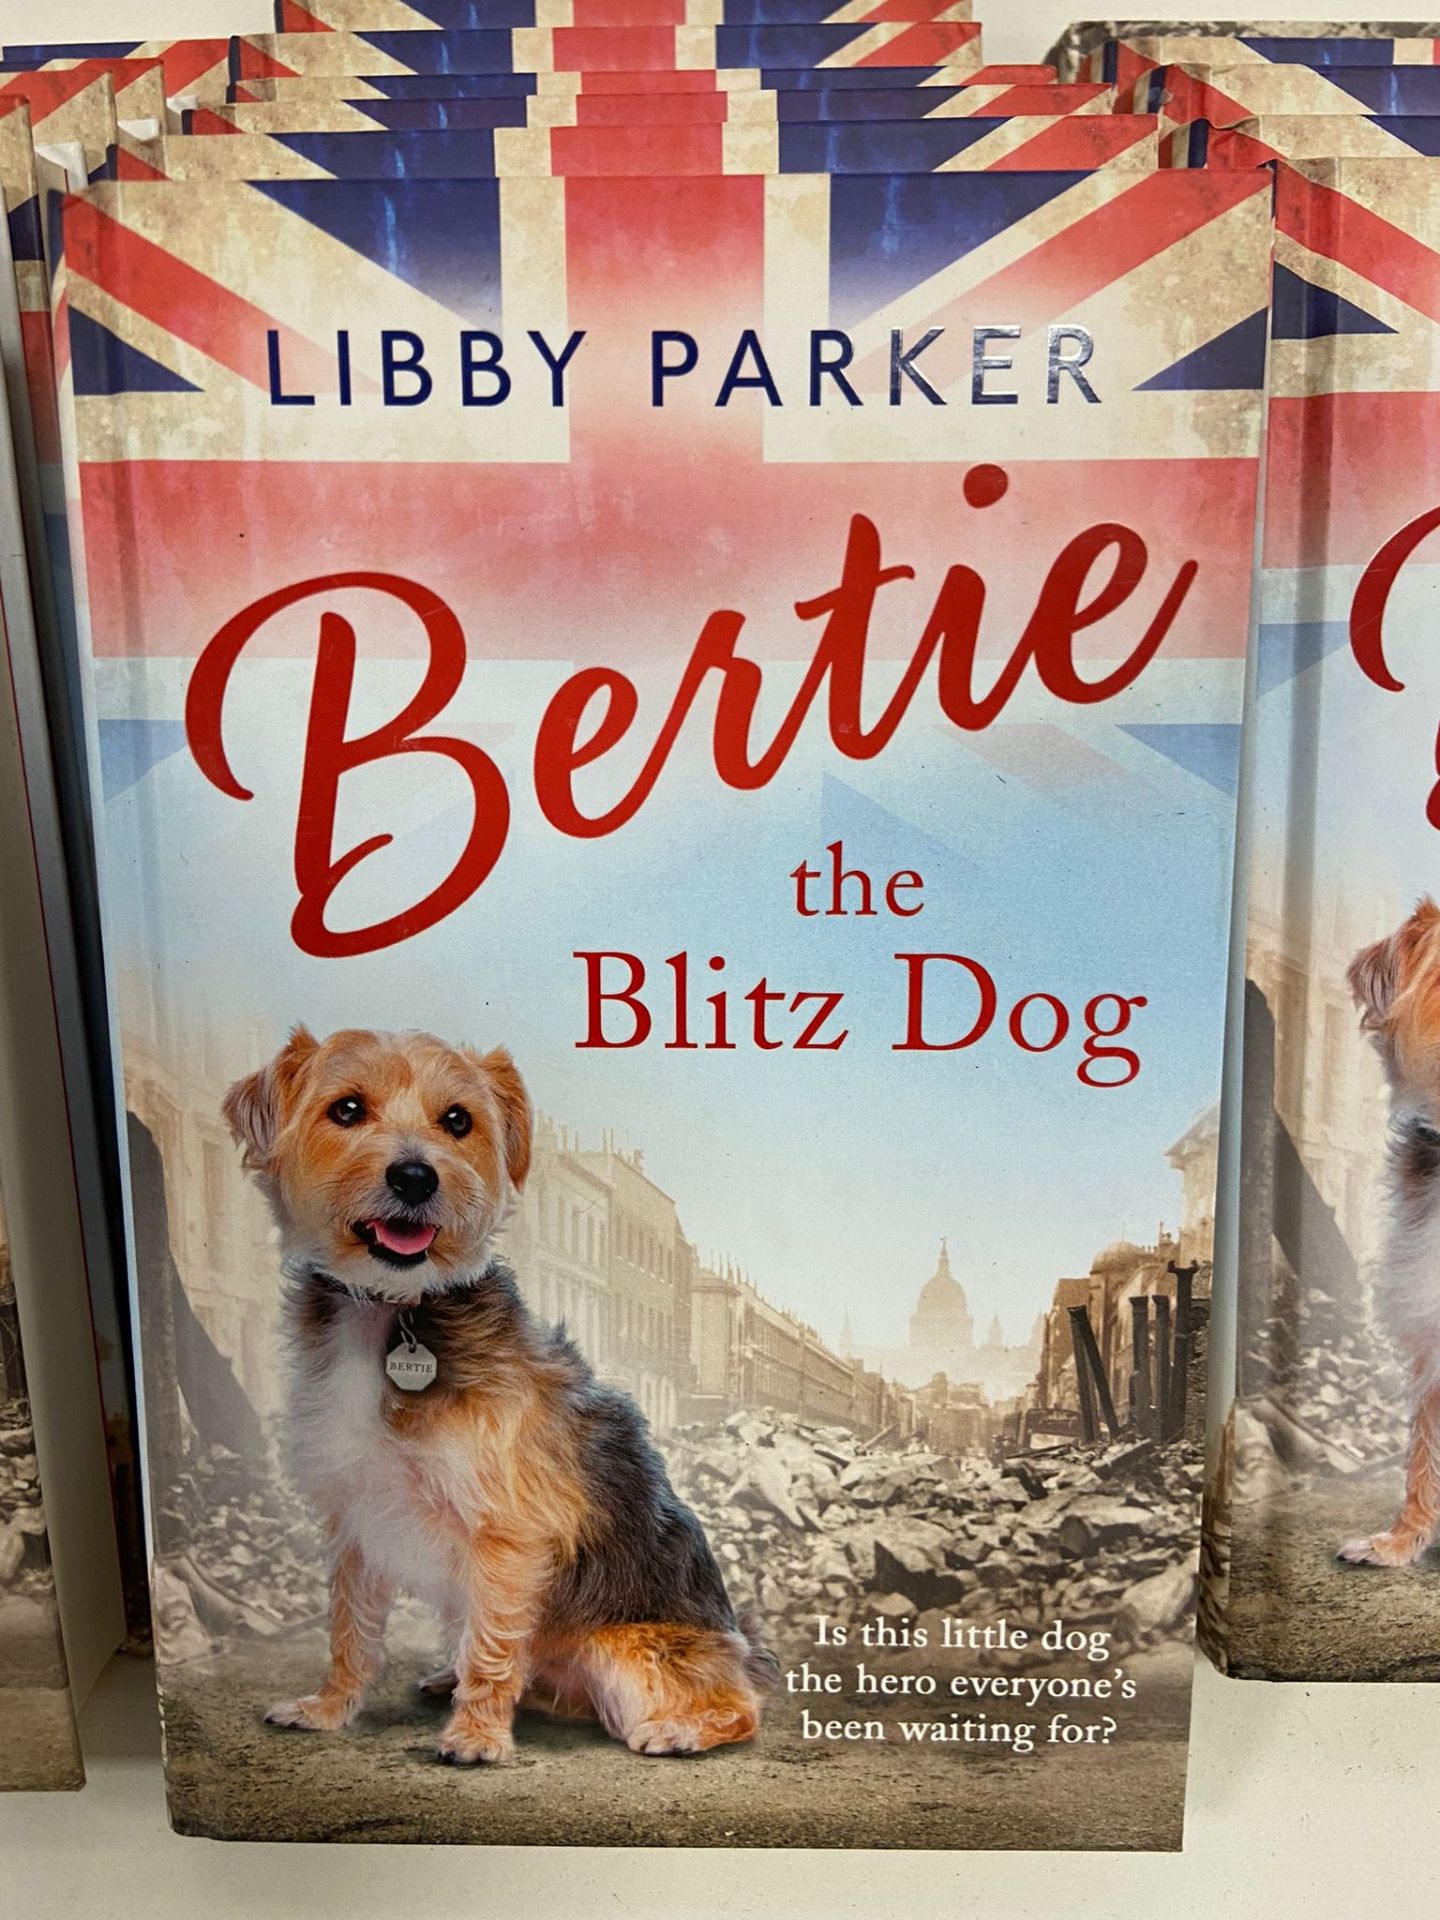 22 x LIBBY PARKERS' Bertie The Blitz Dog In Hardcover - Image 2 of 2